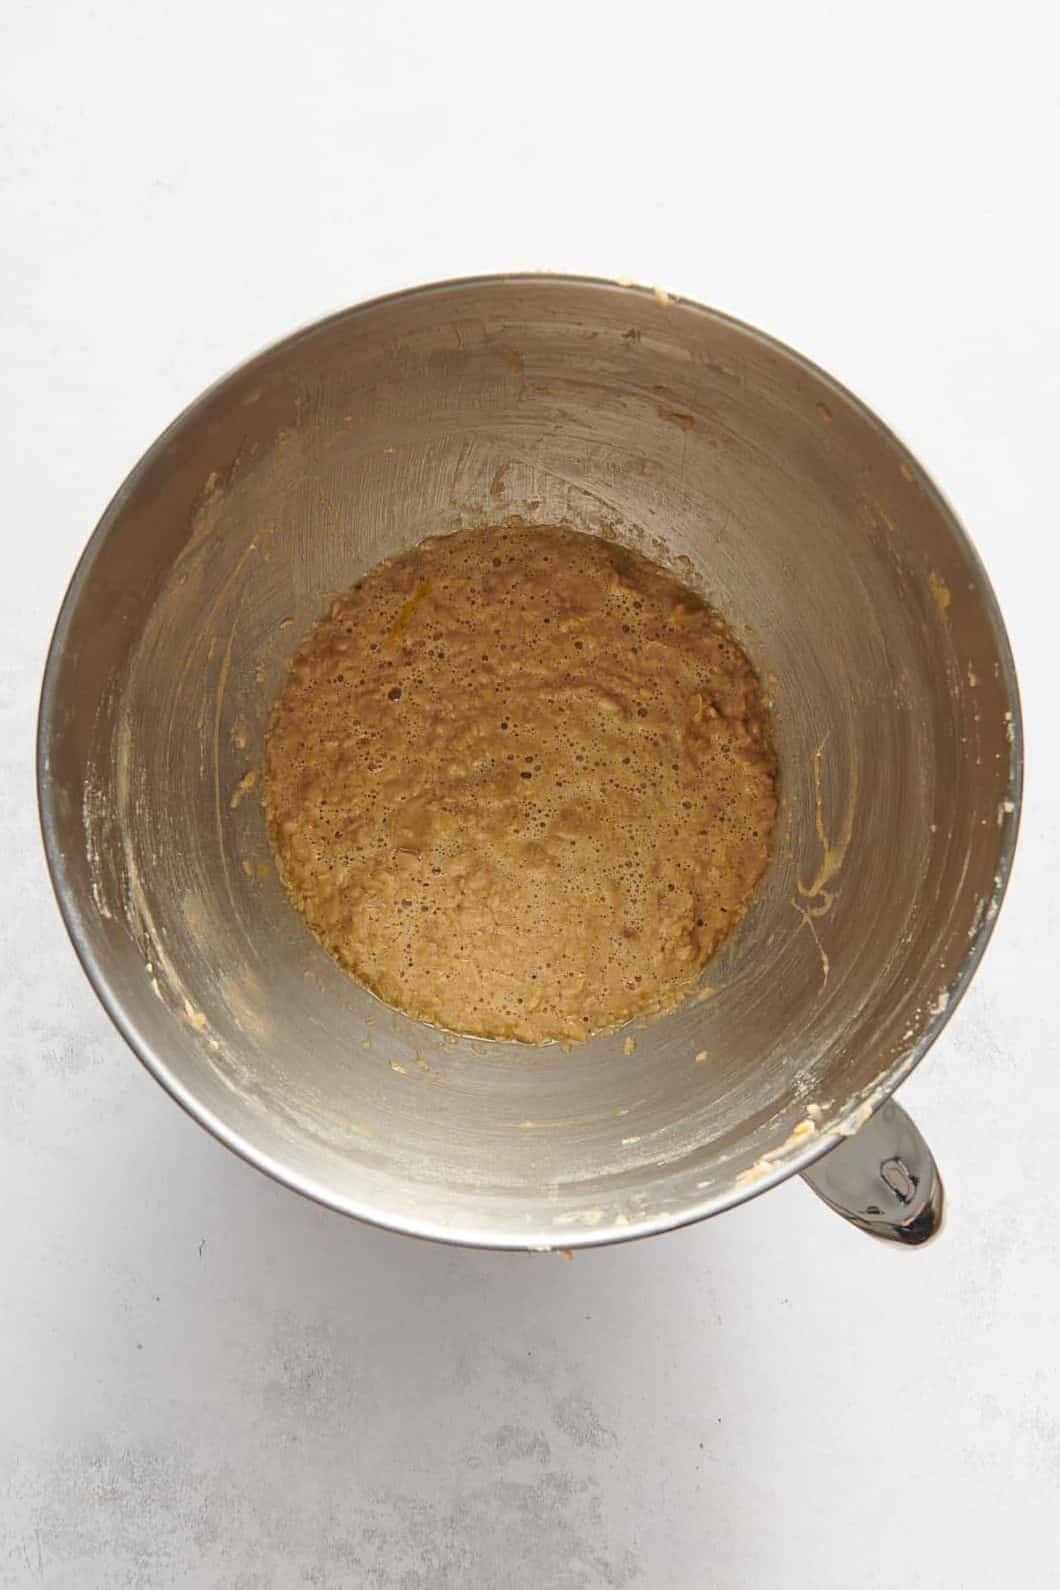 peach cake ingredients in a stainless steel mixing bowl